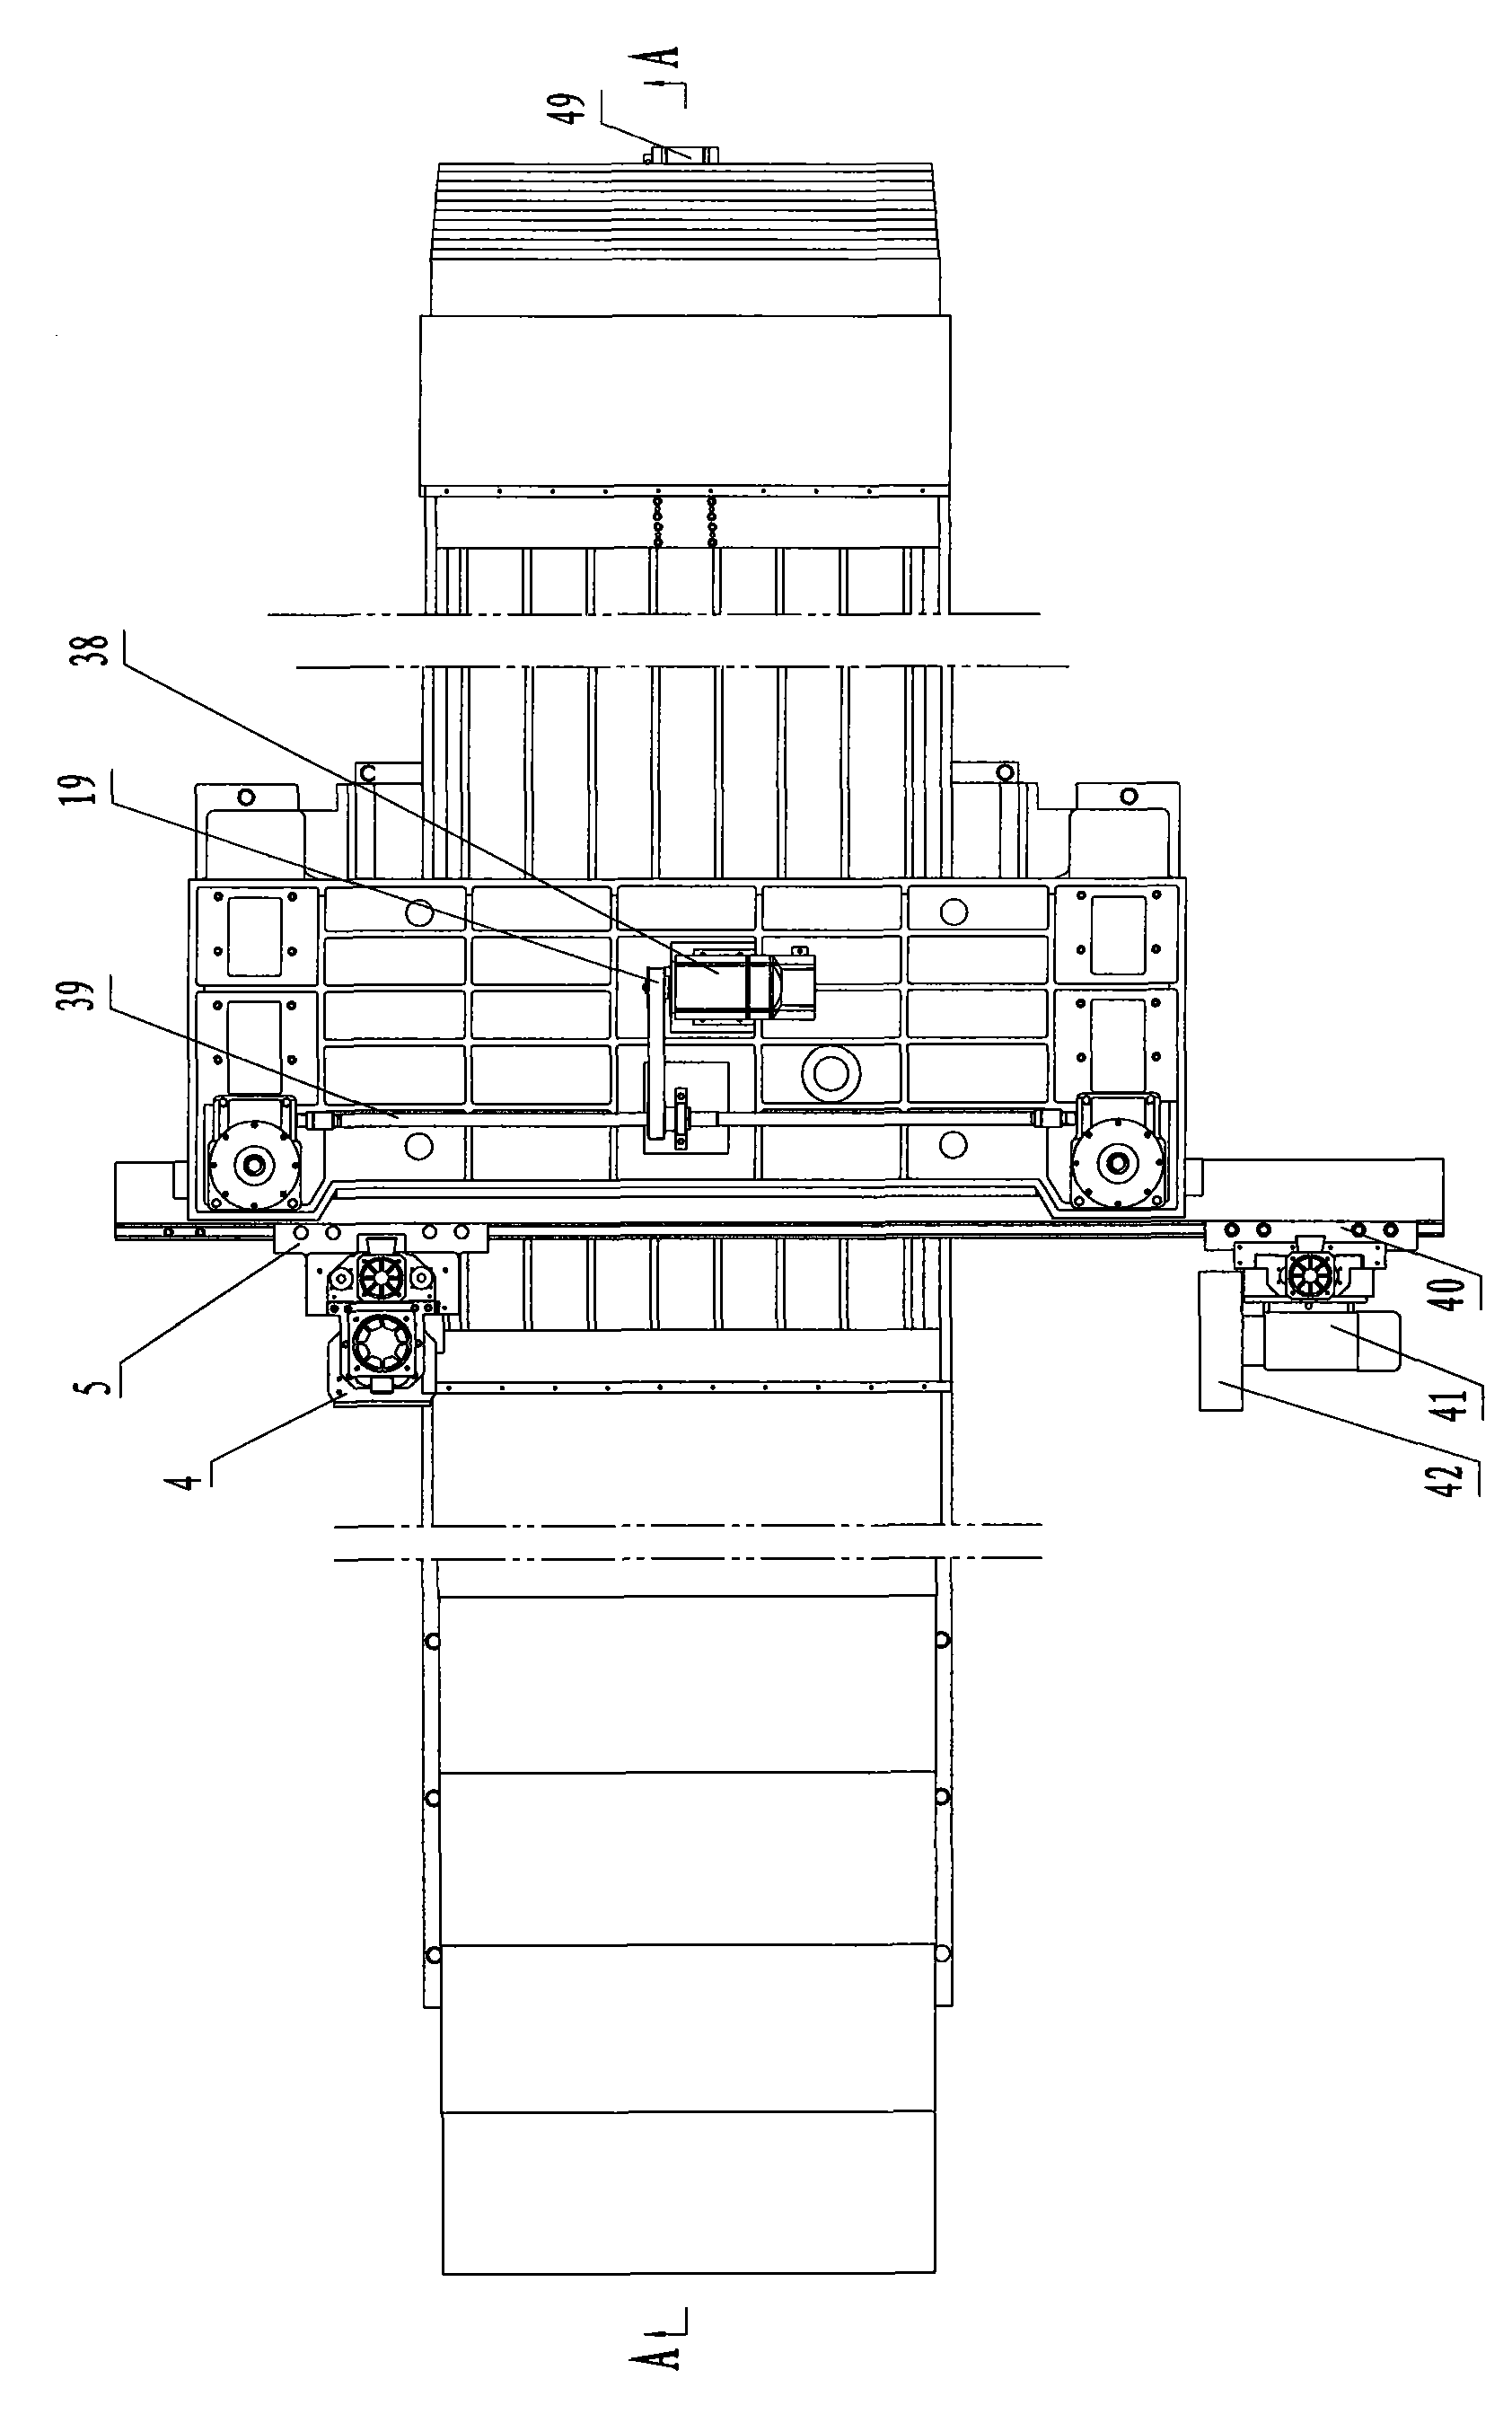 Gantry numerical-control milling and grinding integrated lathe of fixed column and movable beam type